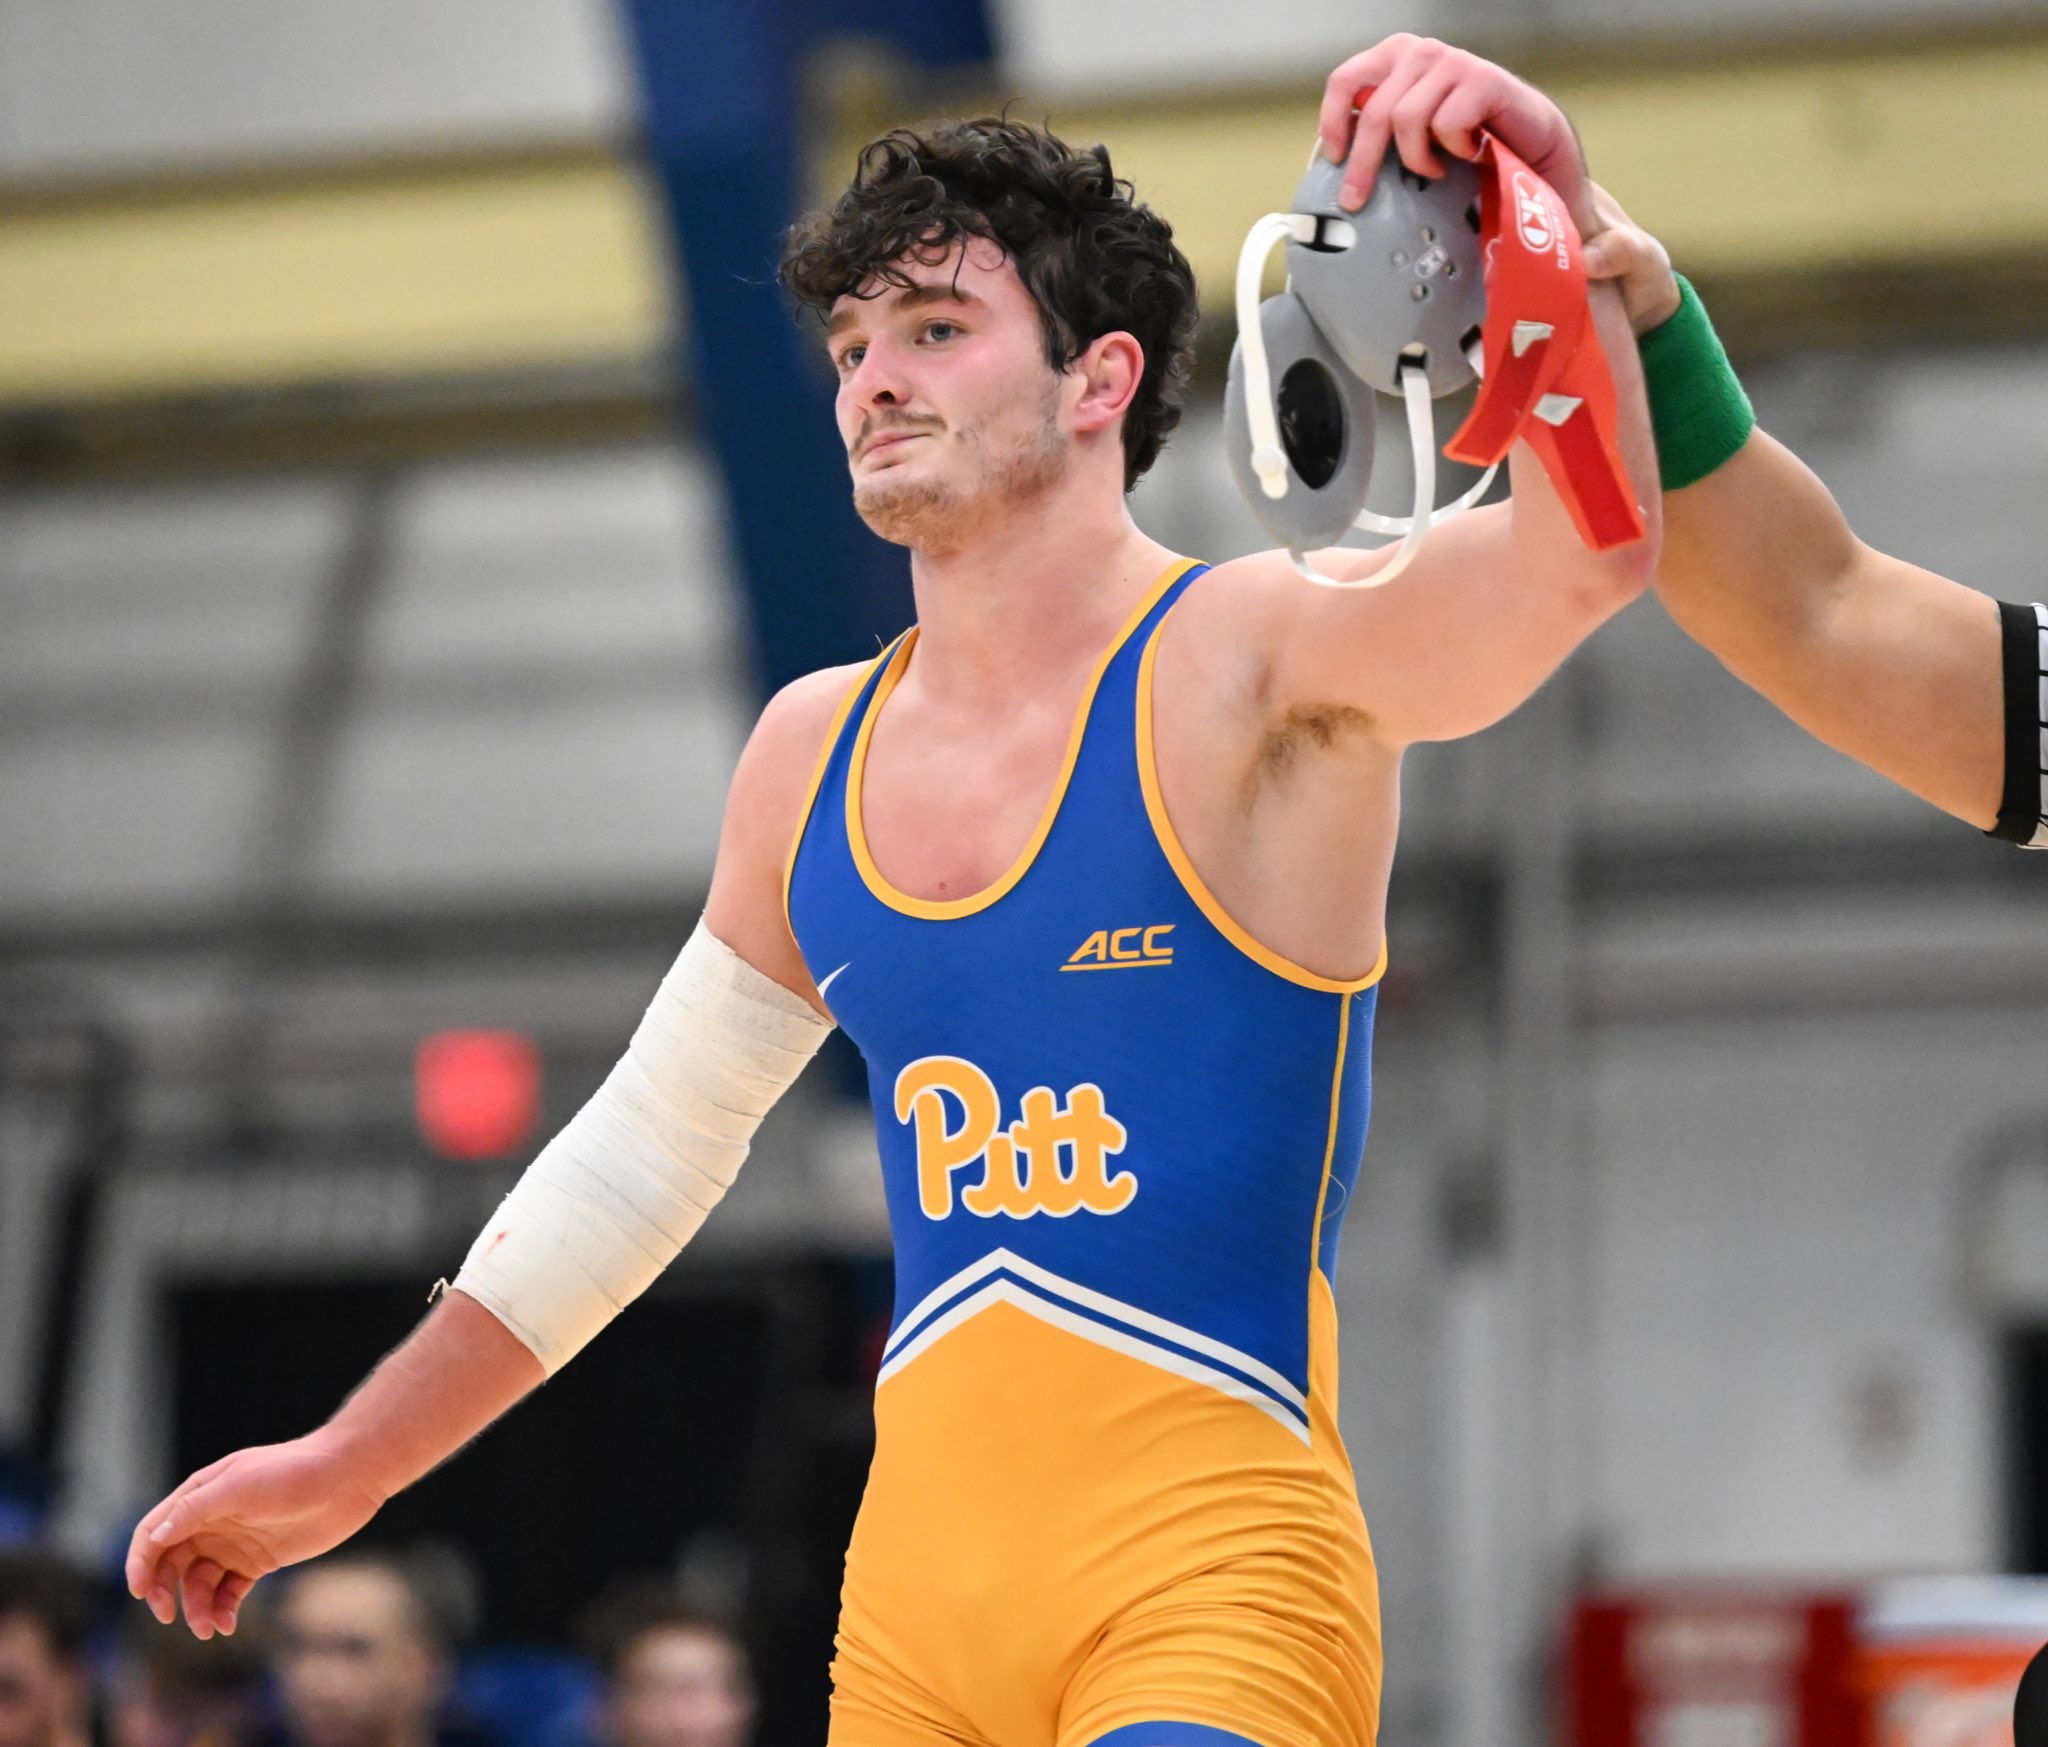 Heller Brothers Record Pins in Pitt's Blue-Gold Dual - Pitt